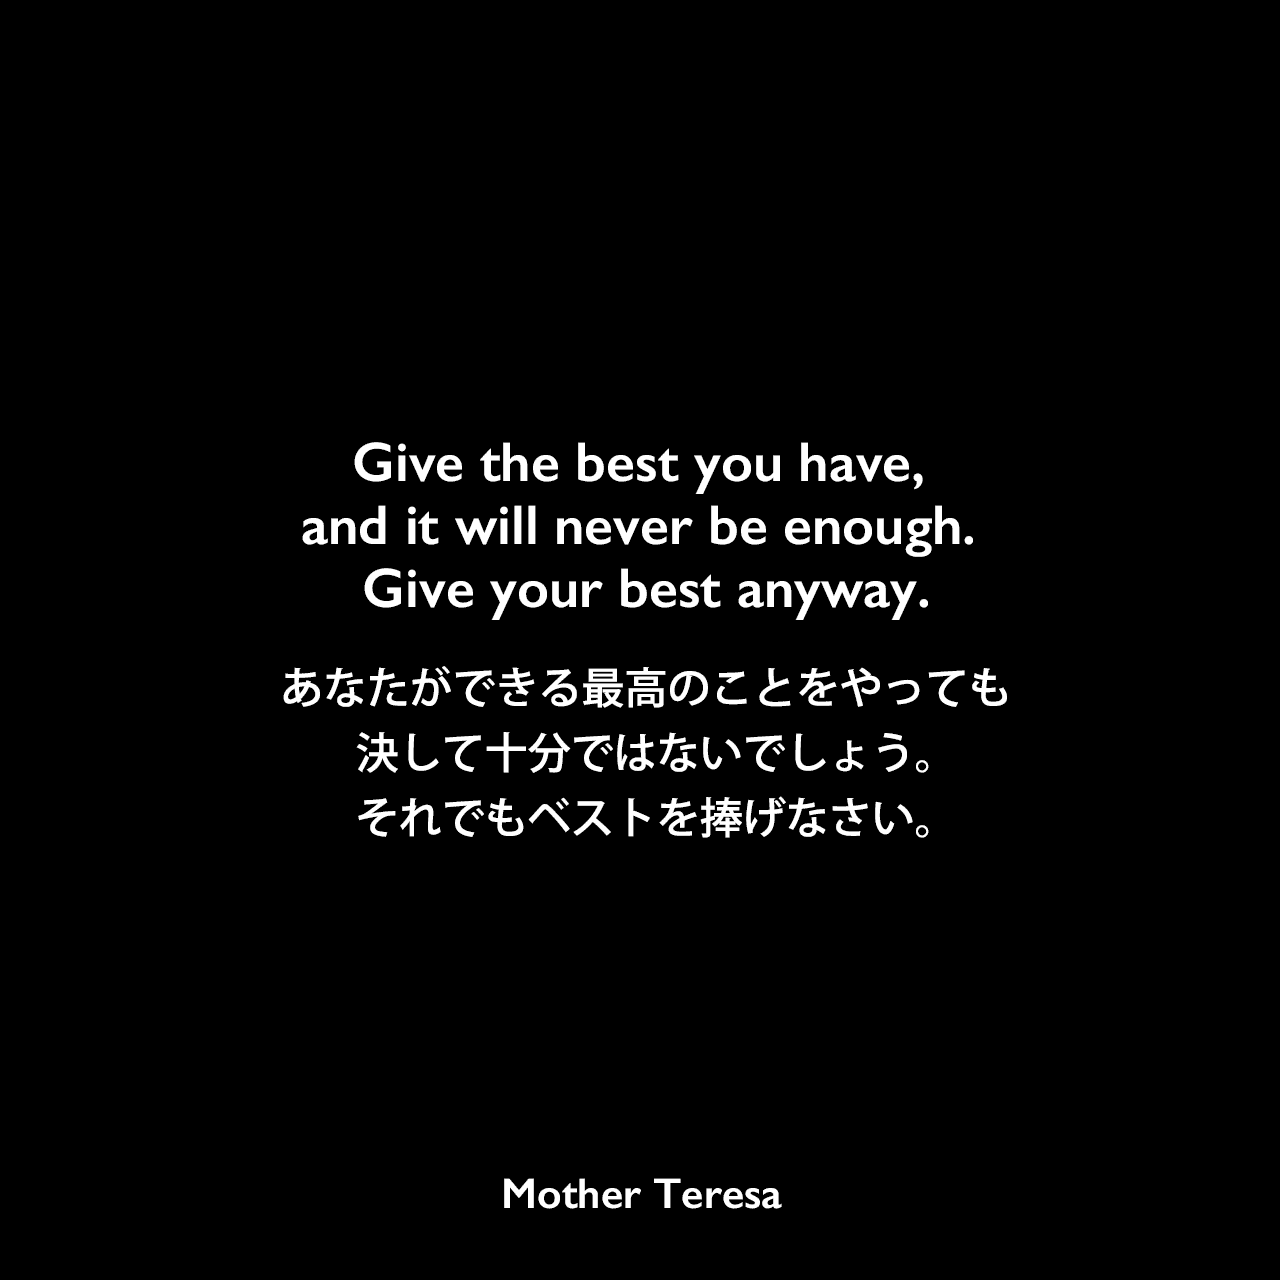 Give the best you have, and it will never be enough. Give your best anyway.あなたができる最高のことをやっても、決して十分ではないでしょう。それでもベストを捧げなさい。Mother Teresa